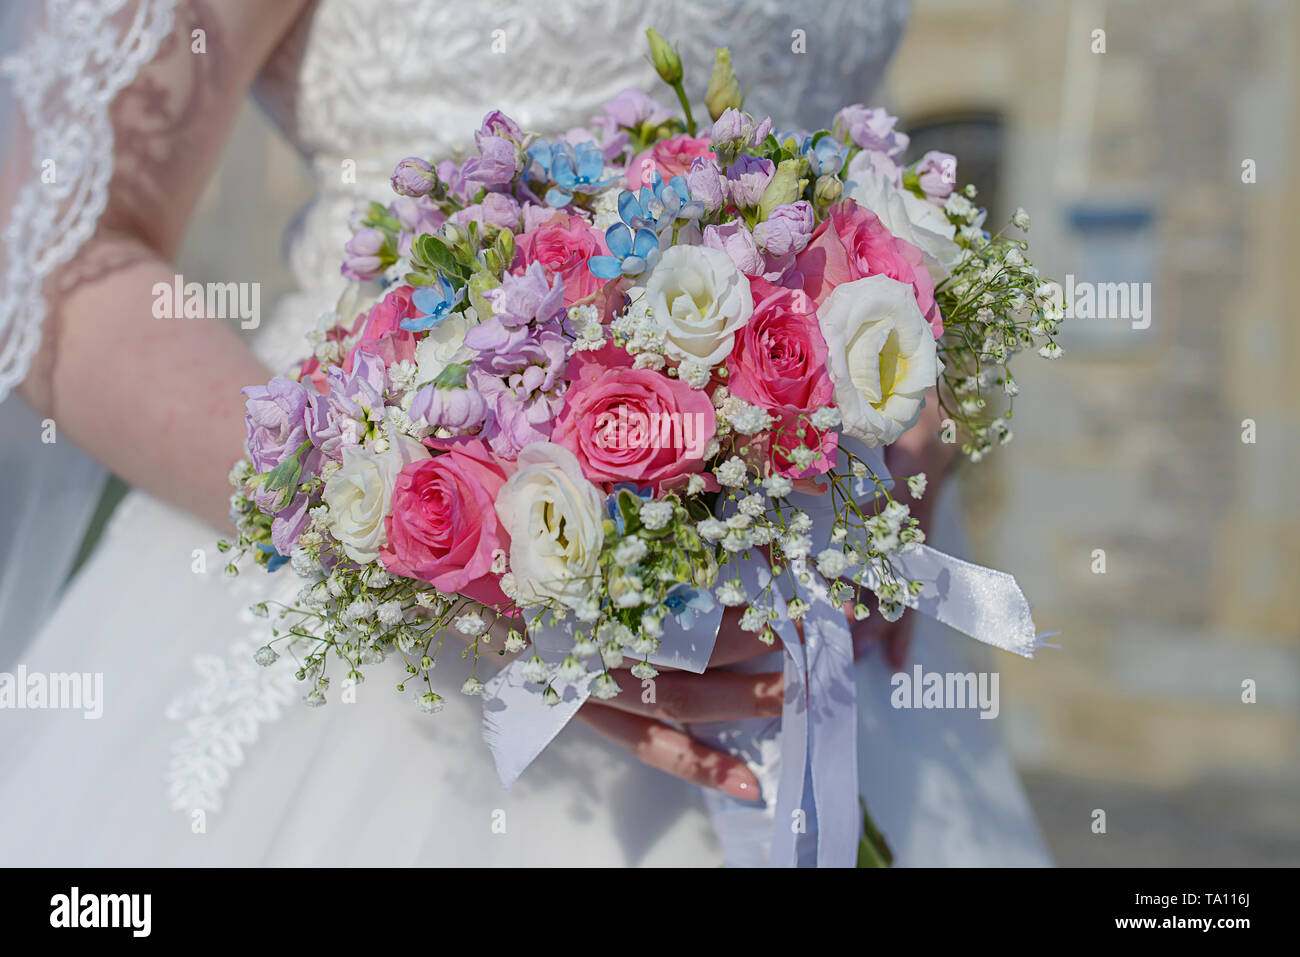 Classy young bride at the wedding ceremony with focus on the hand holding a floral arrangement, a round bouquet featuring pink and white roses Stock Photo